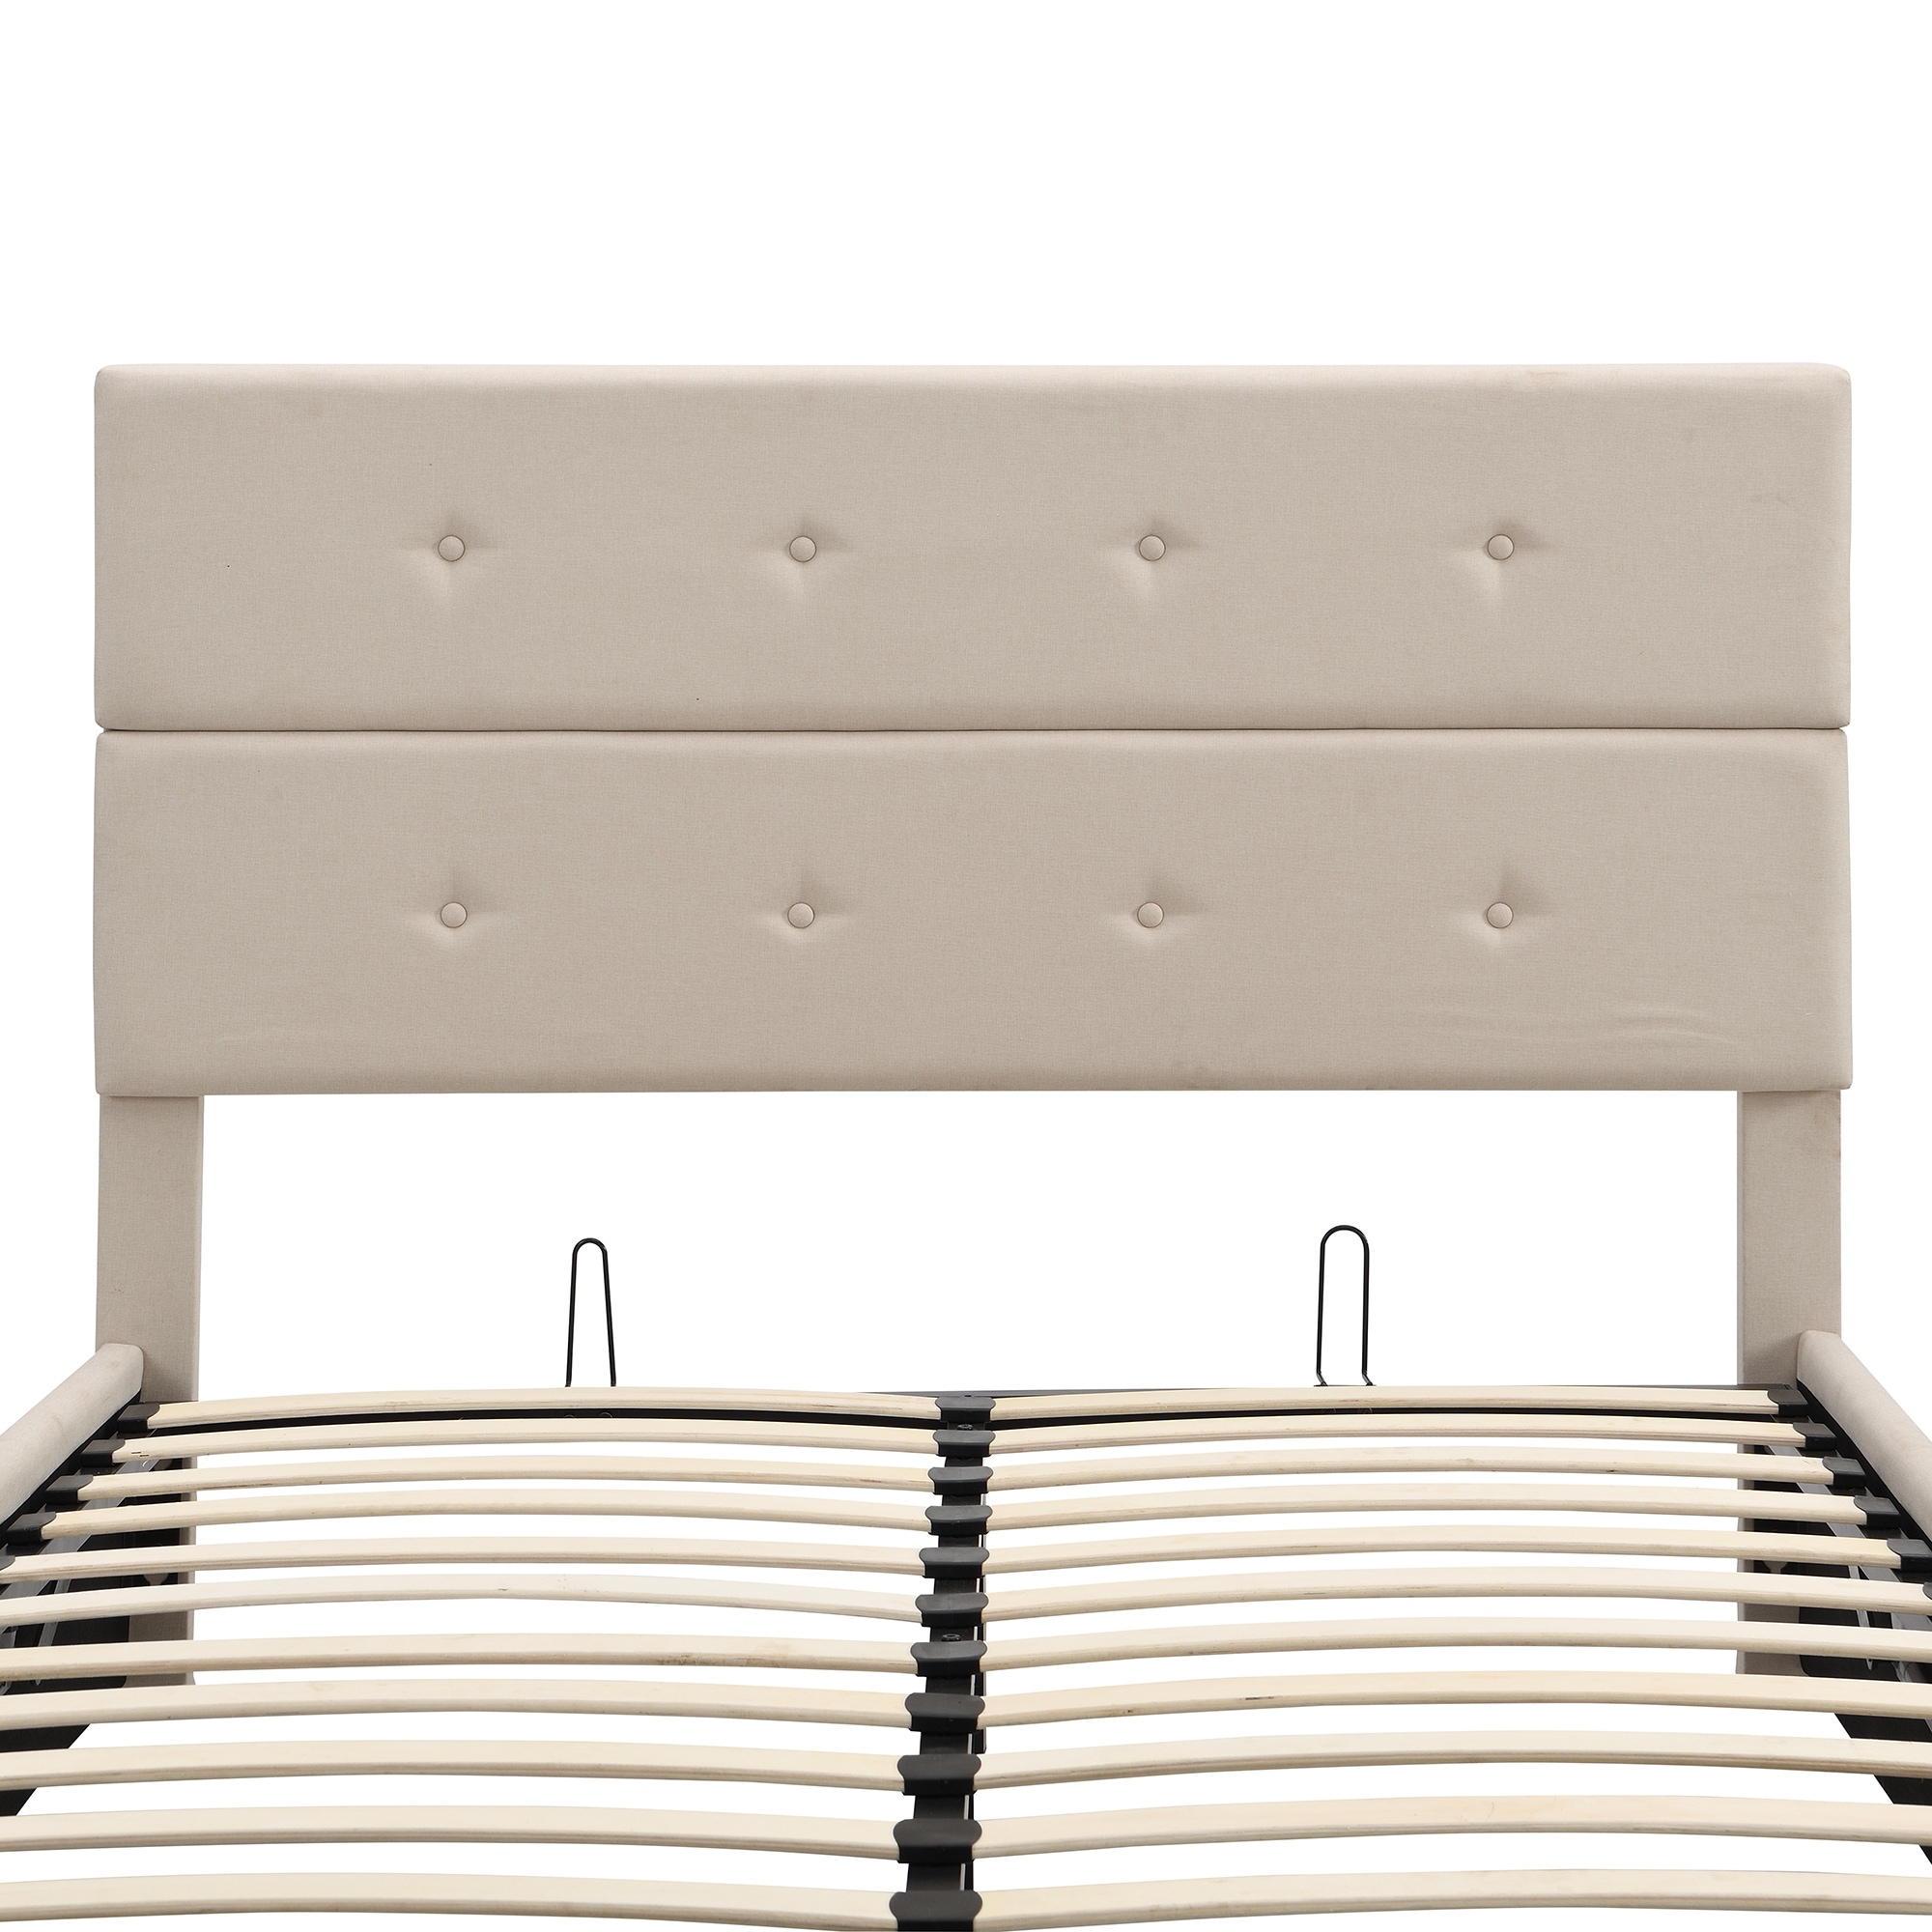 Upholstered Platform Bed with Button-tufted Headboard&Footboard, Underneath Storage, Full Size, Beige